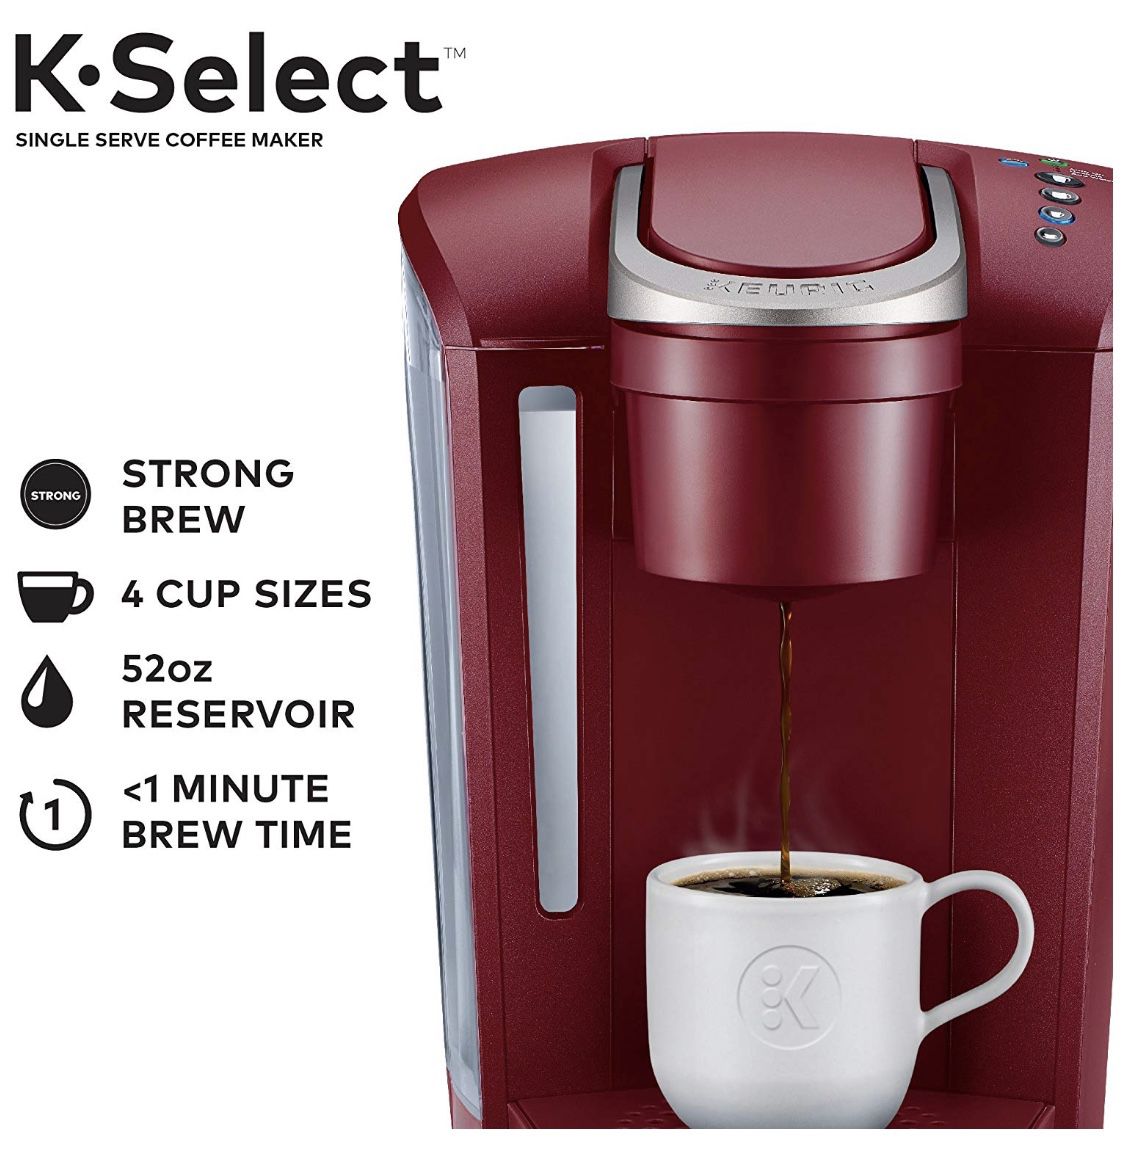 KEURIG SELECT RED EDITION